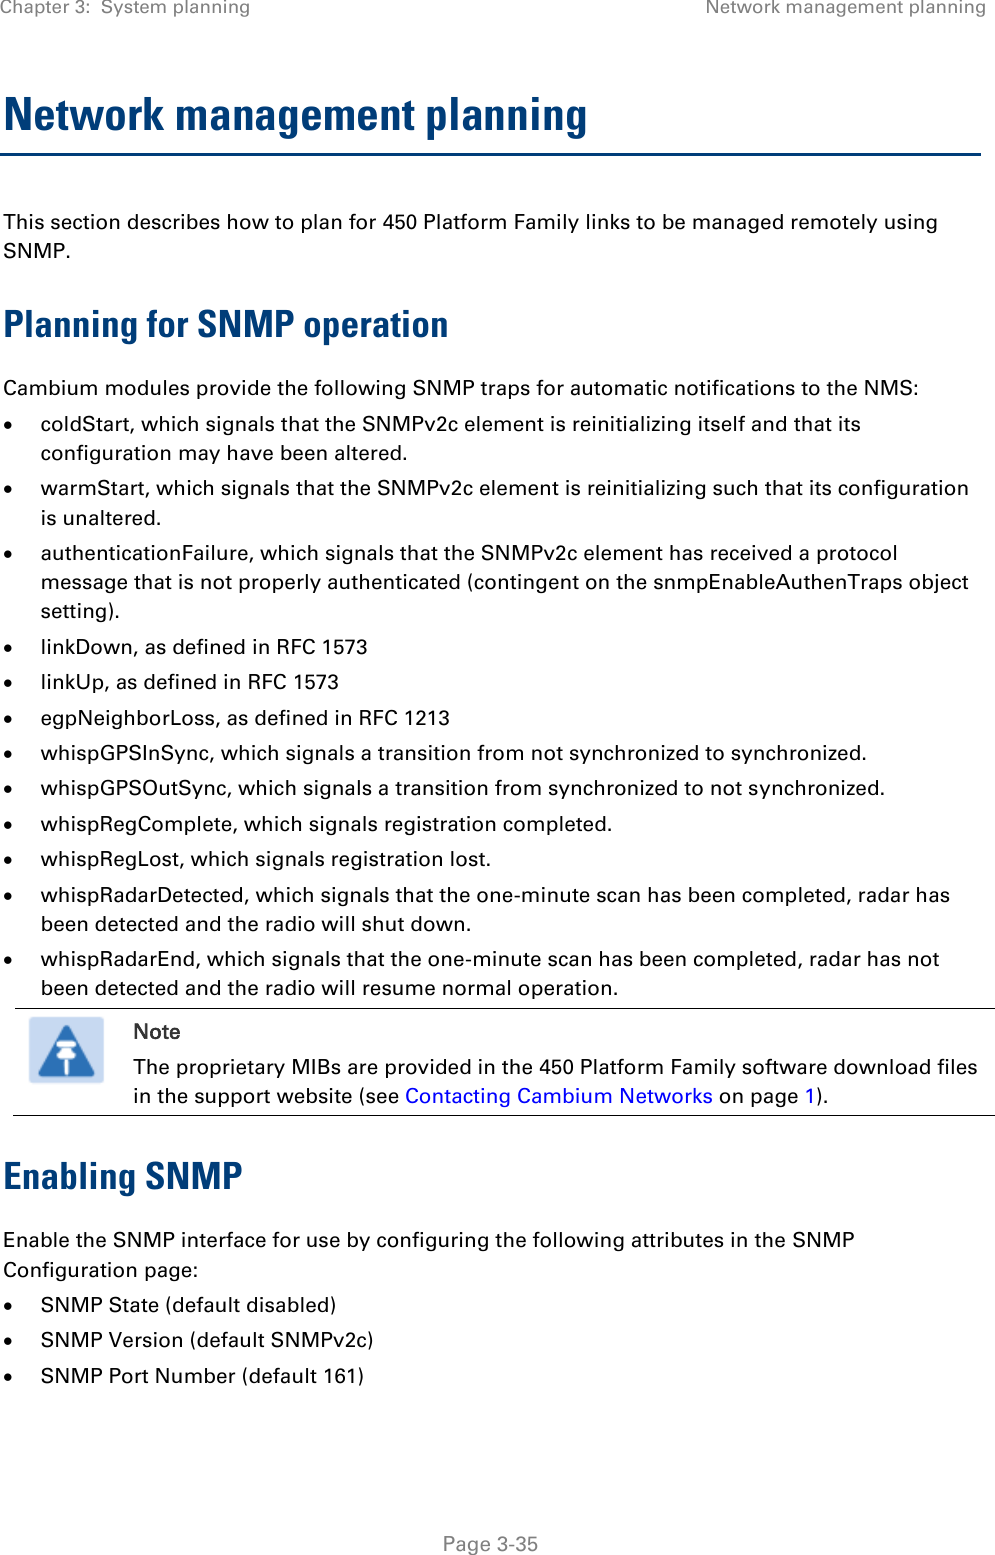 Chapter 3:  System planning Network management planning   Page 3-35 Network management planning This section describes how to plan for 450 Platform Family links to be managed remotely using SNMP. Planning for SNMP operation Cambium modules provide the following SNMP traps for automatic notifications to the NMS:  coldStart, which signals that the SNMPv2c element is reinitializing itself and that its configuration may have been altered.  warmStart, which signals that the SNMPv2c element is reinitializing such that its configuration is unaltered.  authenticationFailure, which signals that the SNMPv2c element has received a protocol message that is not properly authenticated (contingent on the snmpEnableAuthenTraps object setting).  linkDown, as defined in RFC 1573  linkUp, as defined in RFC 1573  egpNeighborLoss, as defined in RFC 1213  whispGPSInSync, which signals a transition from not synchronized to synchronized.  whispGPSOutSync, which signals a transition from synchronized to not synchronized.  whispRegComplete, which signals registration completed.   whispRegLost, which signals registration lost.   whispRadarDetected, which signals that the one-minute scan has been completed, radar has been detected and the radio will shut down.   whispRadarEnd, which signals that the one-minute scan has been completed, radar has not been detected and the radio will resume normal operation.   Note The proprietary MIBs are provided in the 450 Platform Family software download files in the support website (see Contacting Cambium Networks on page 1). Enabling SNMP Enable the SNMP interface for use by configuring the following attributes in the SNMP Configuration page:  SNMP State (default disabled)  SNMP Version (default SNMPv2c)  SNMP Port Number (default 161) 